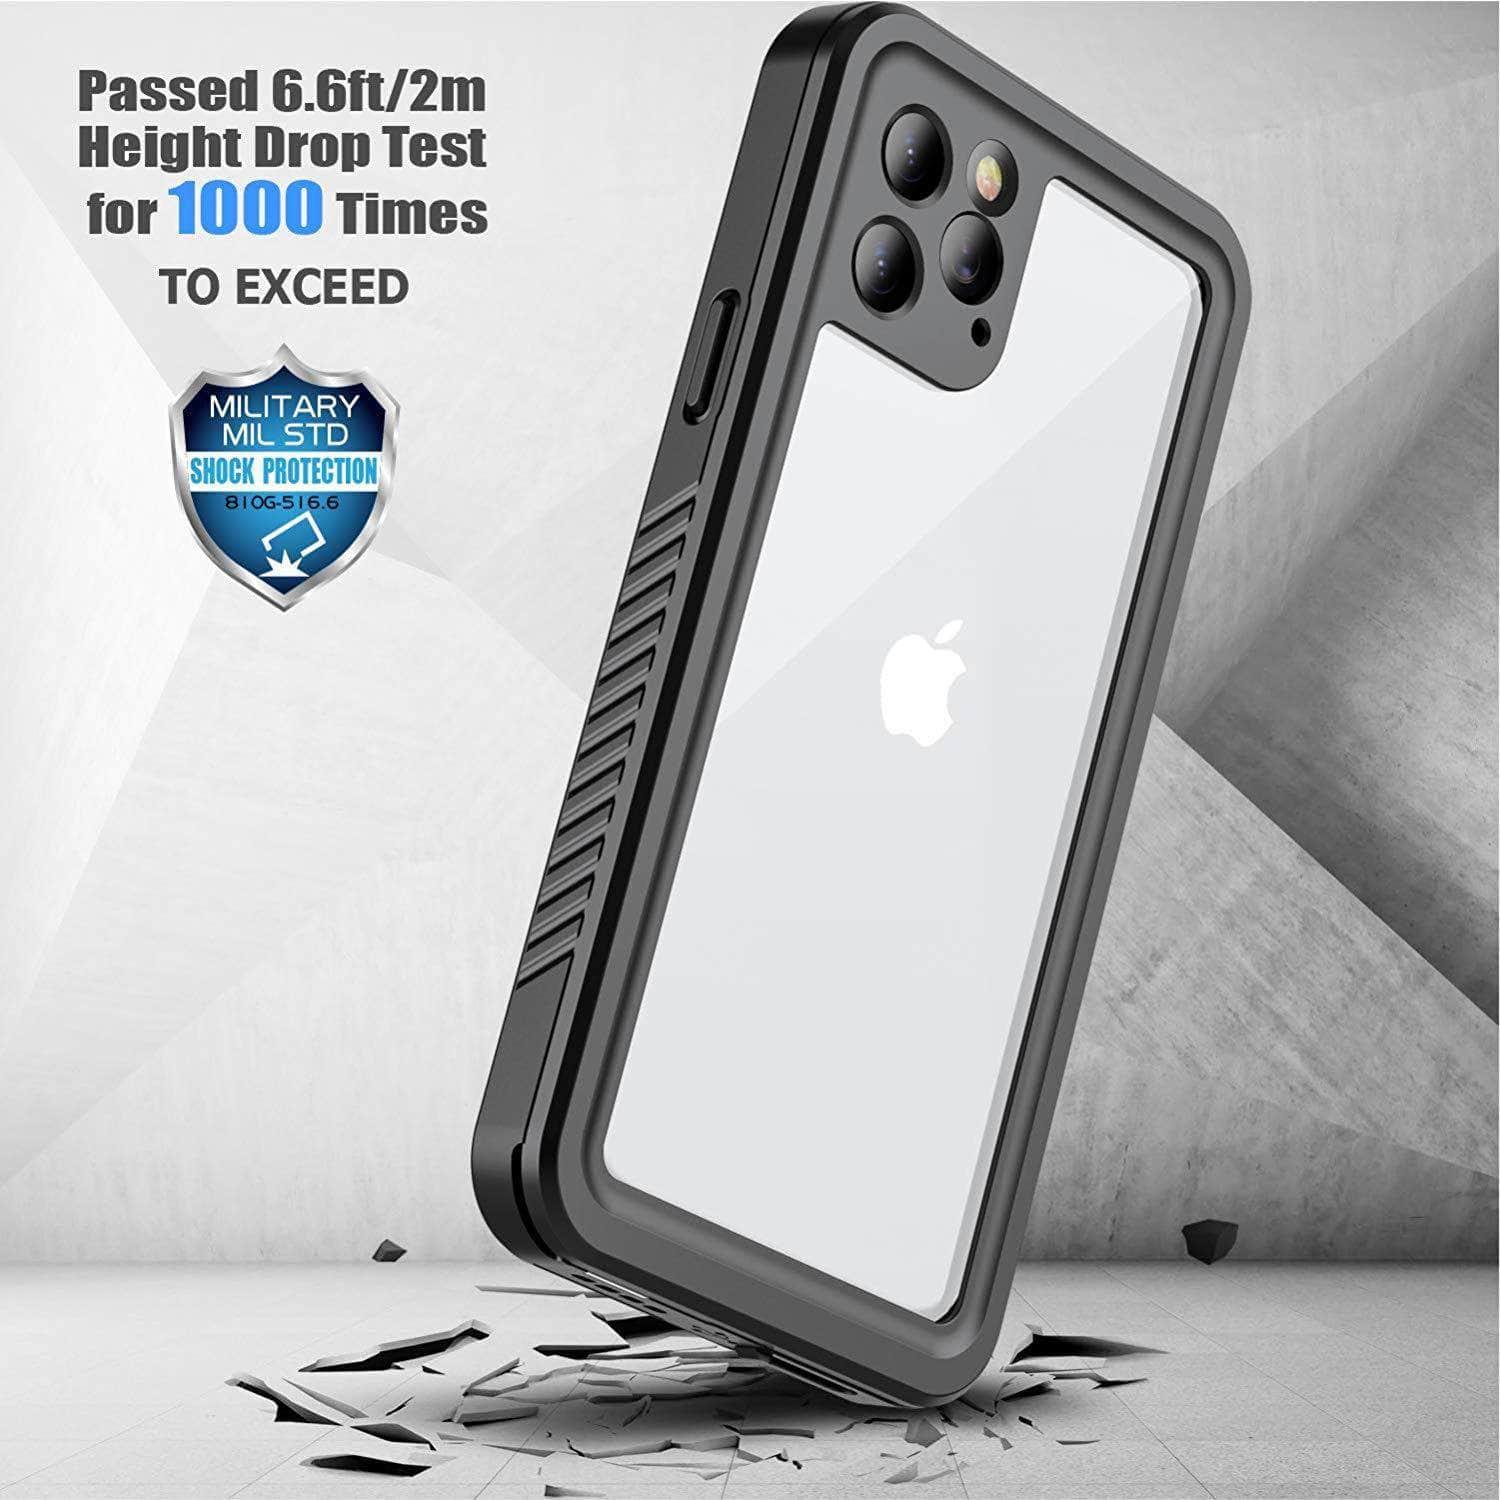 IP68 Waterproof iPhone 11 Pro Max Shock Dirt Snow Proof Protection - CaseBuddy